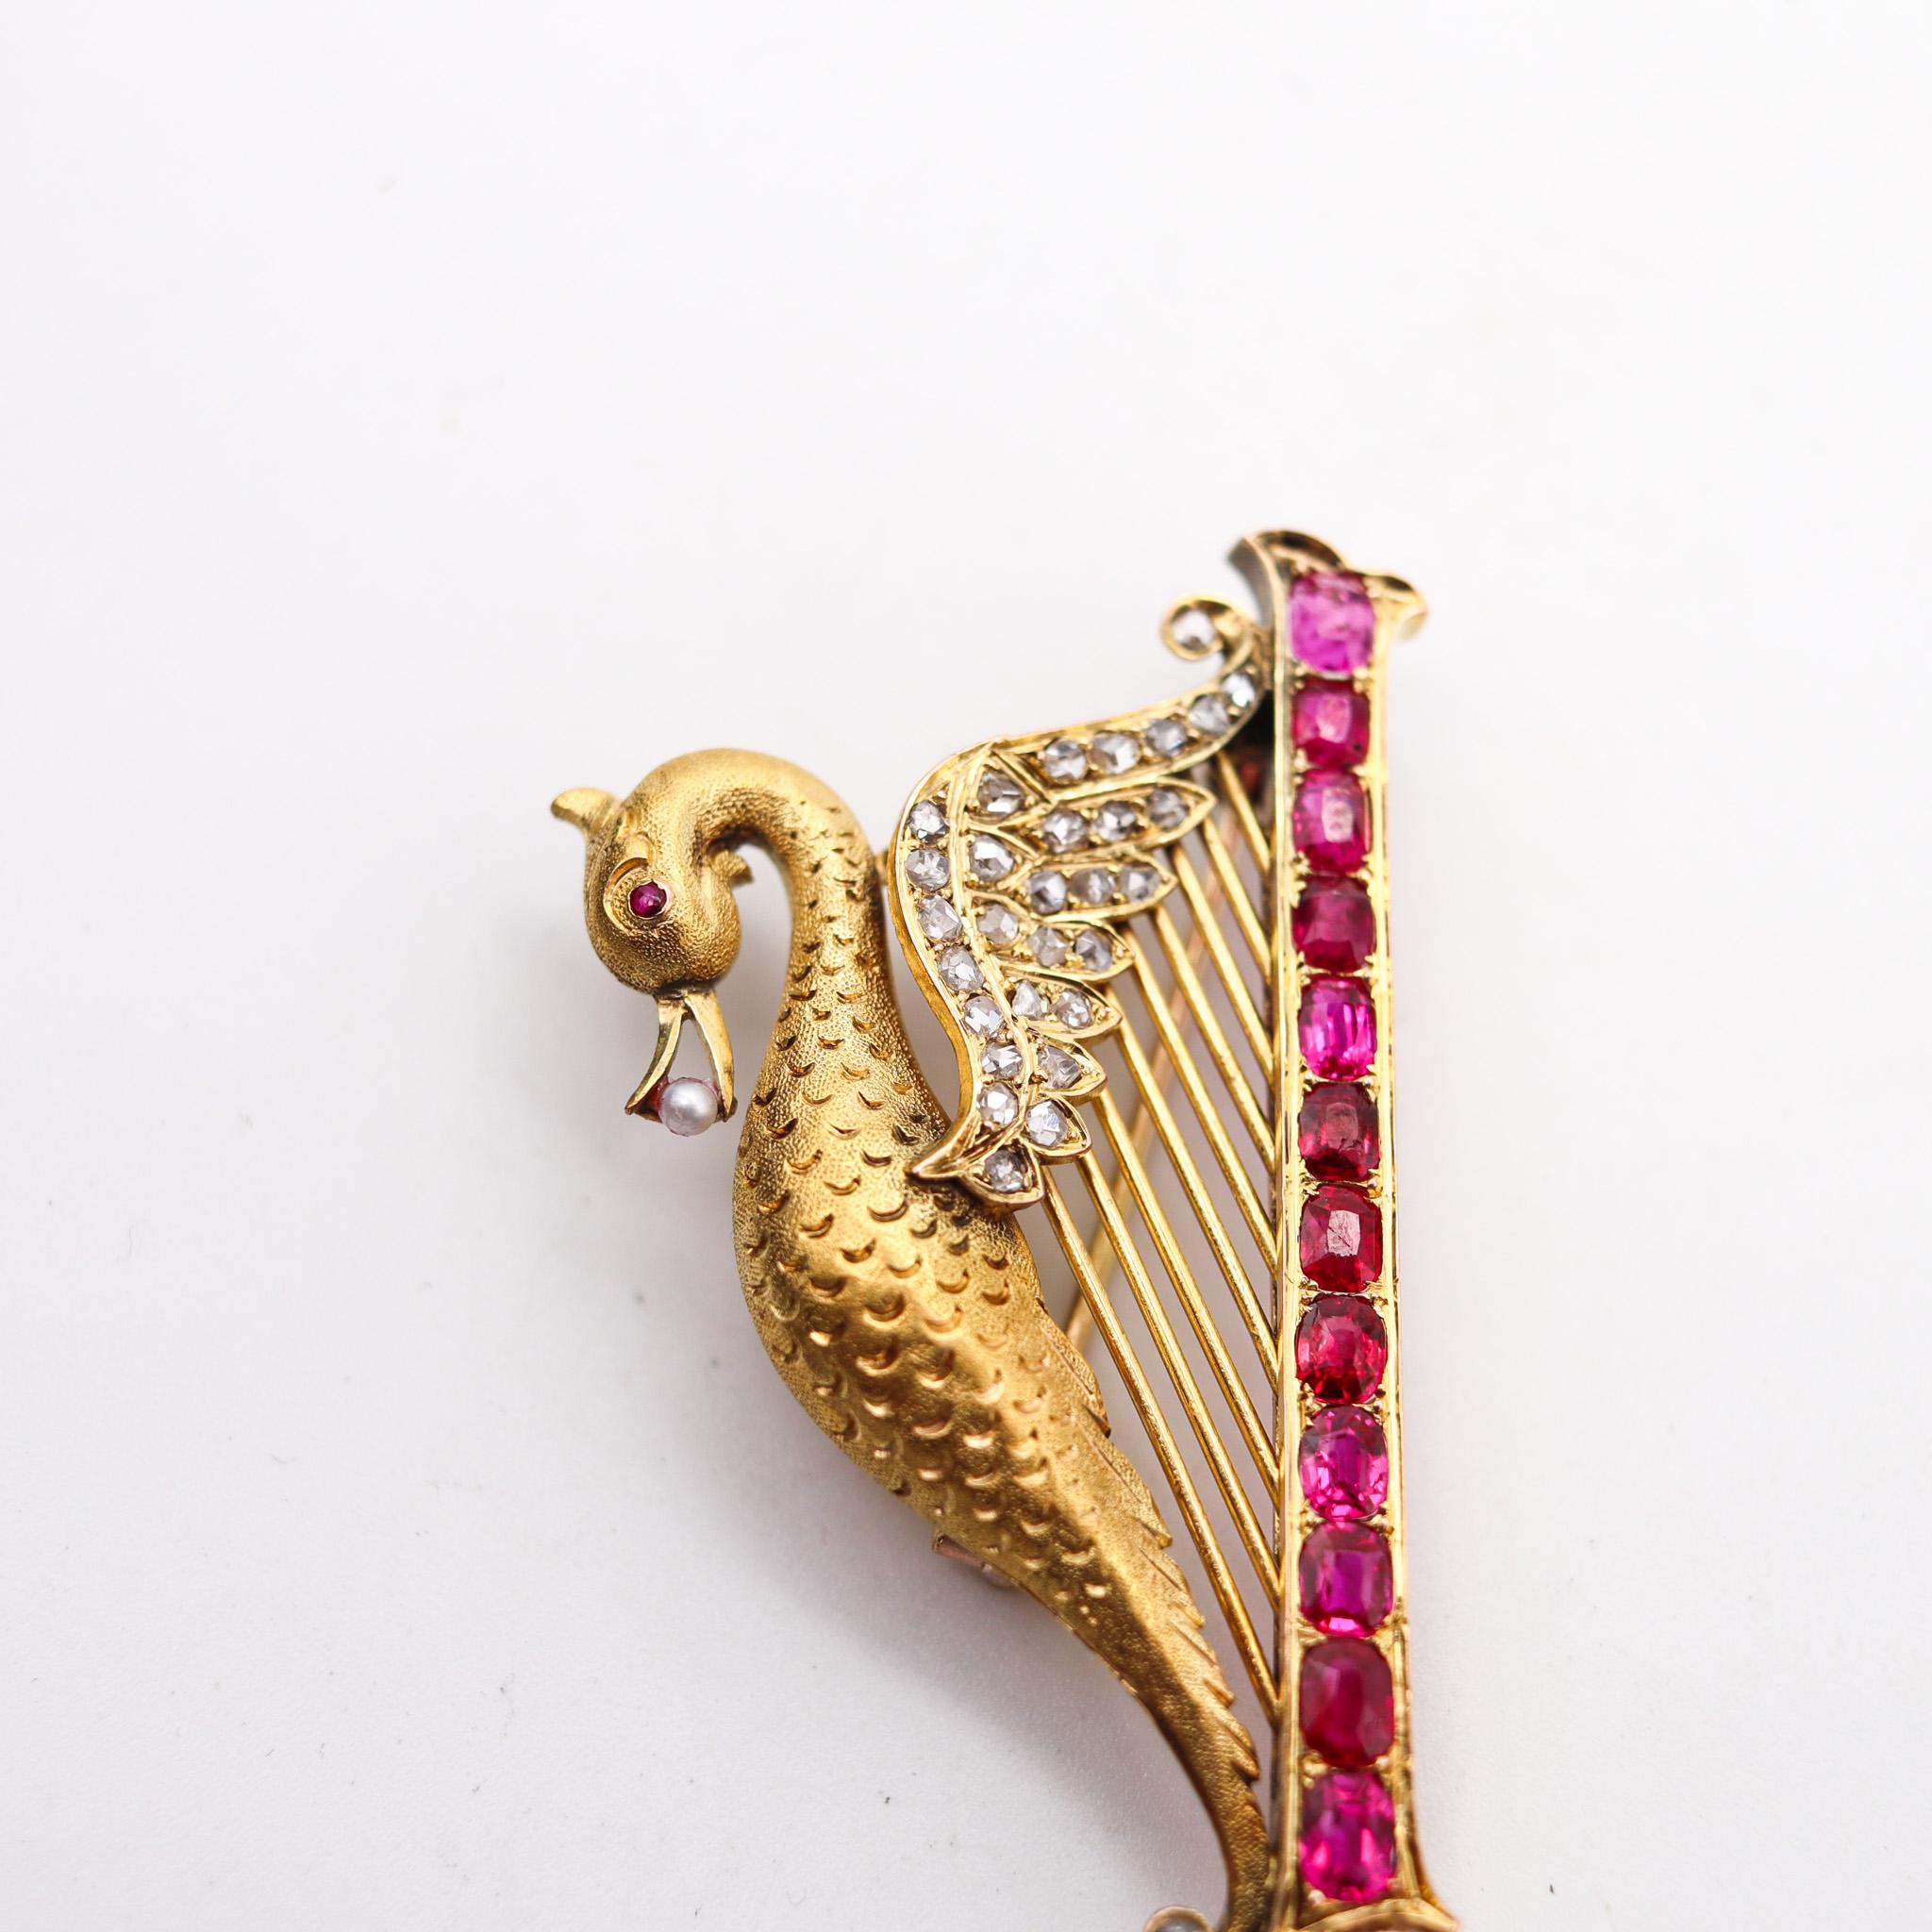 Women's or Men's French 1890 Art Nouveau Swan Arp Brooch 18Kt Gold With 5.05 Ctw Rubies Diamonds For Sale